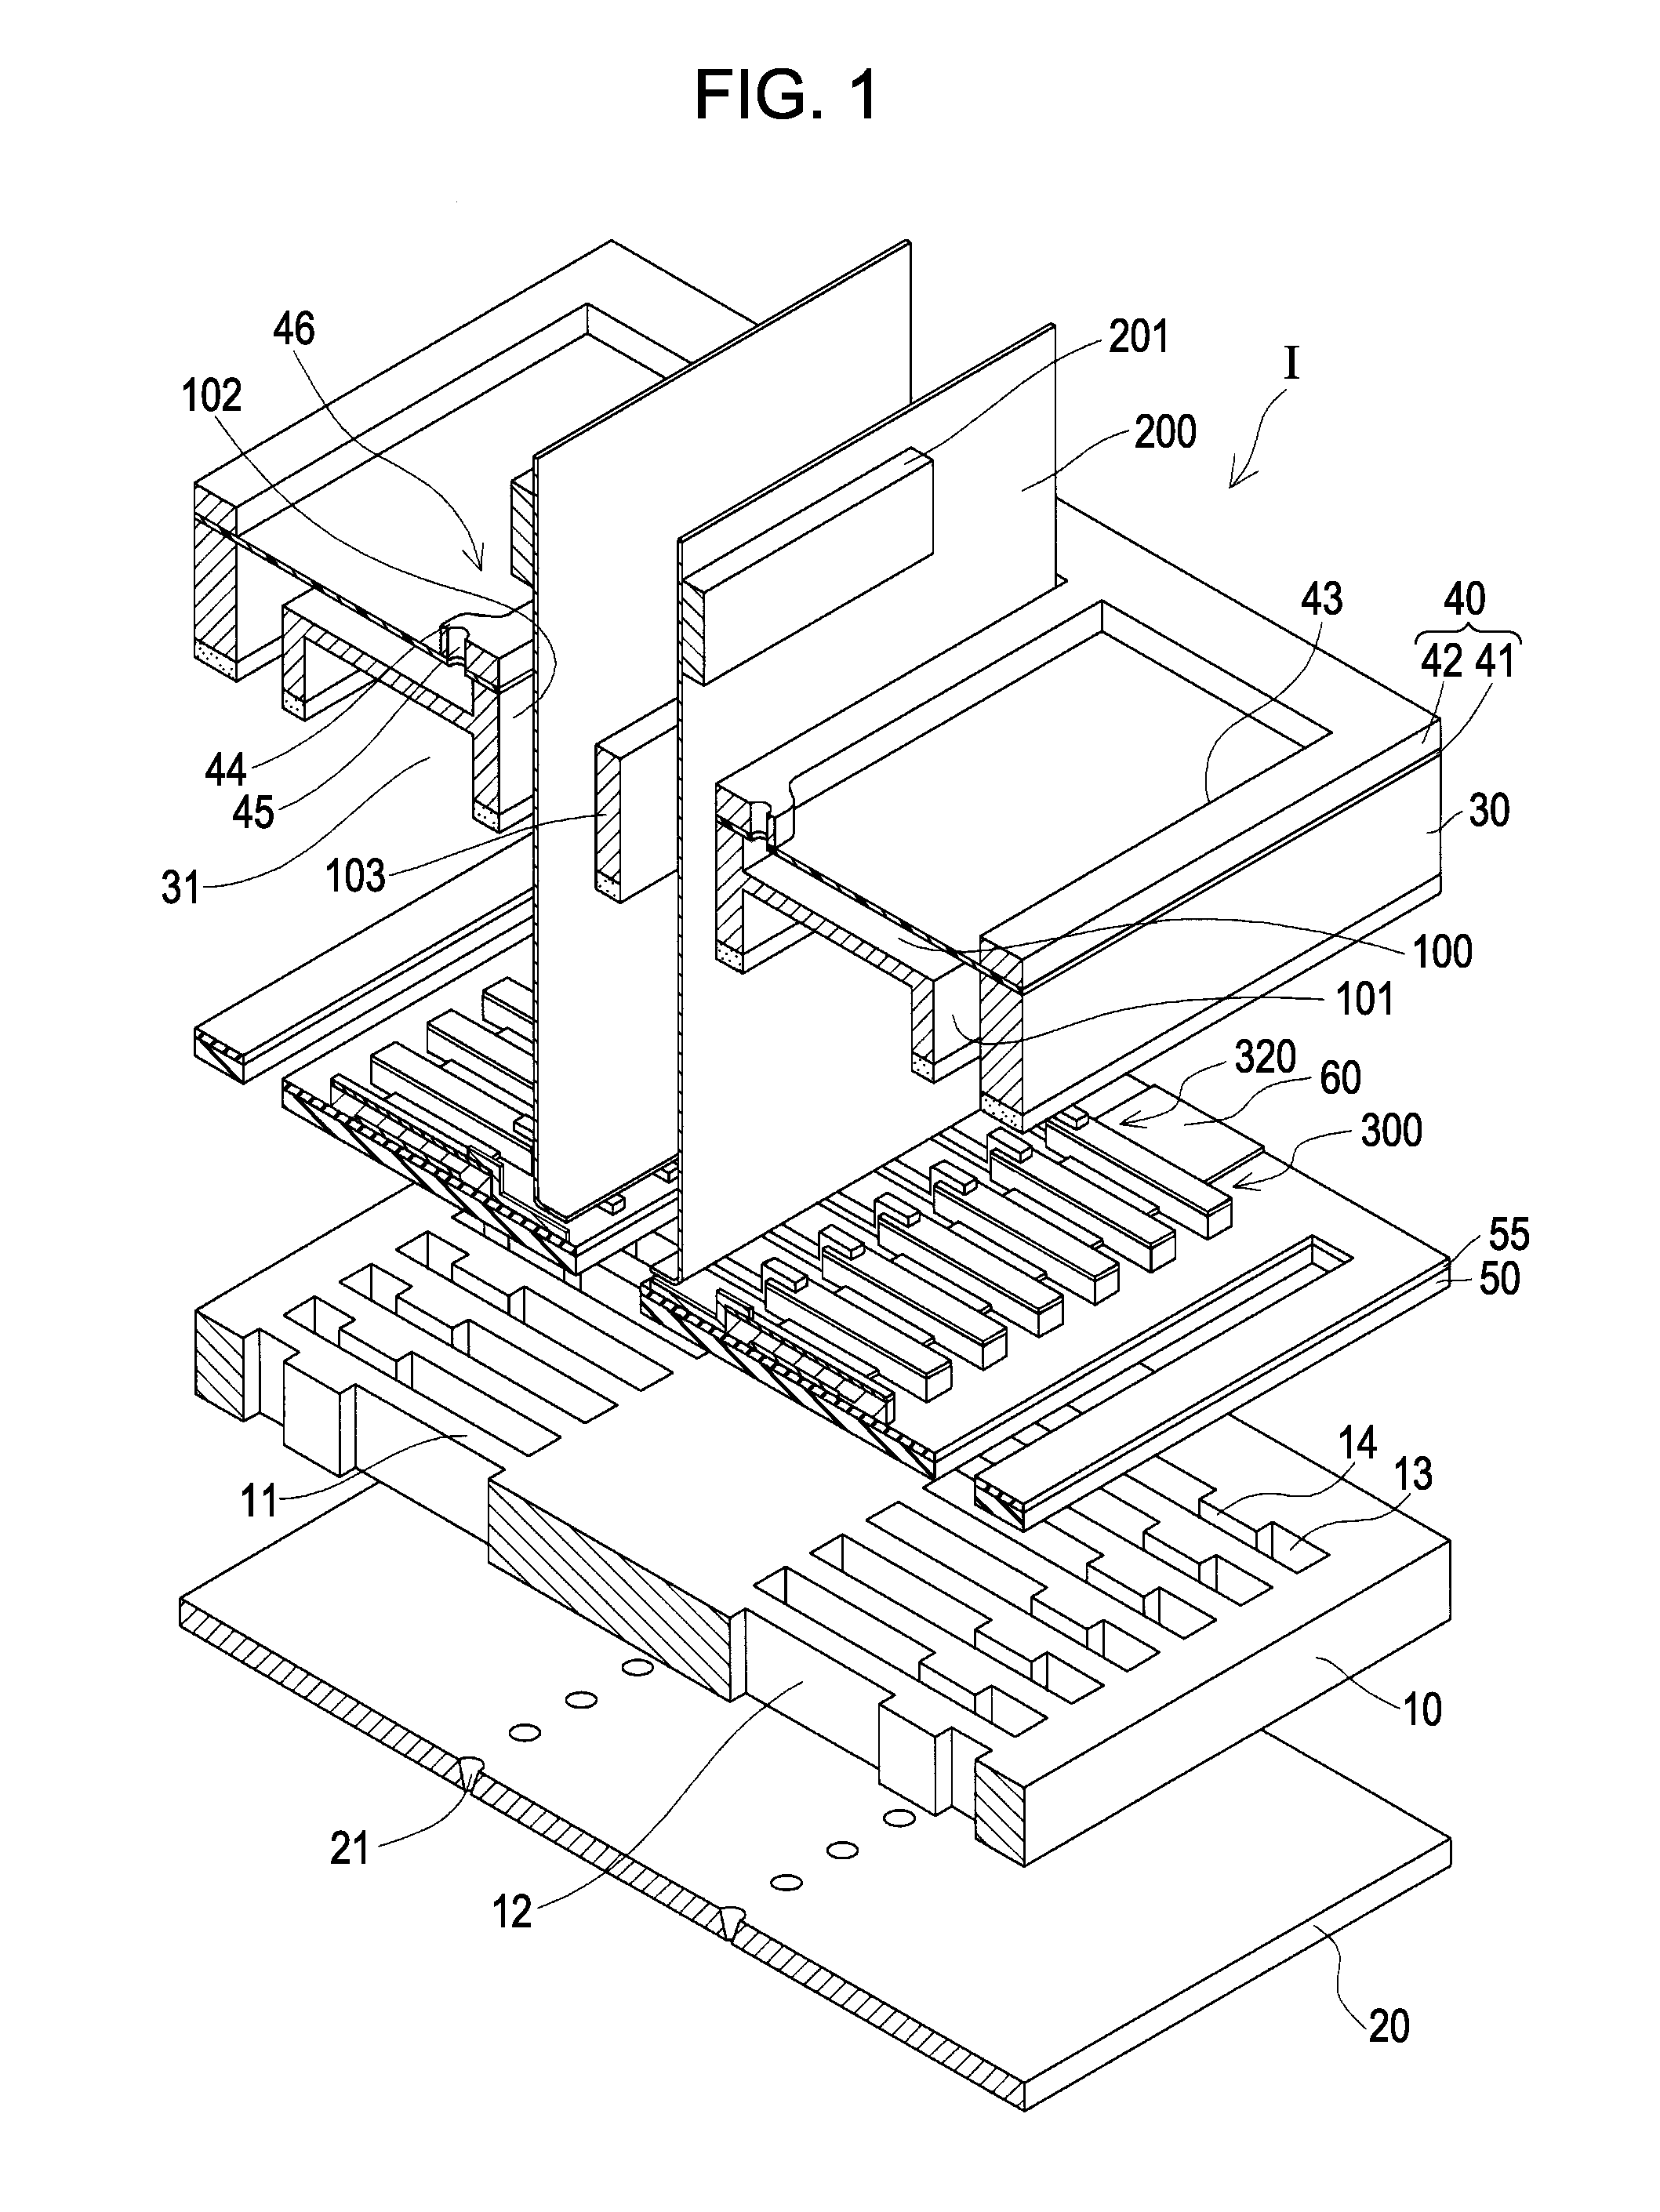 Liquid ejecting head, manufacturing method thereof, and liquid ejecting apparatus